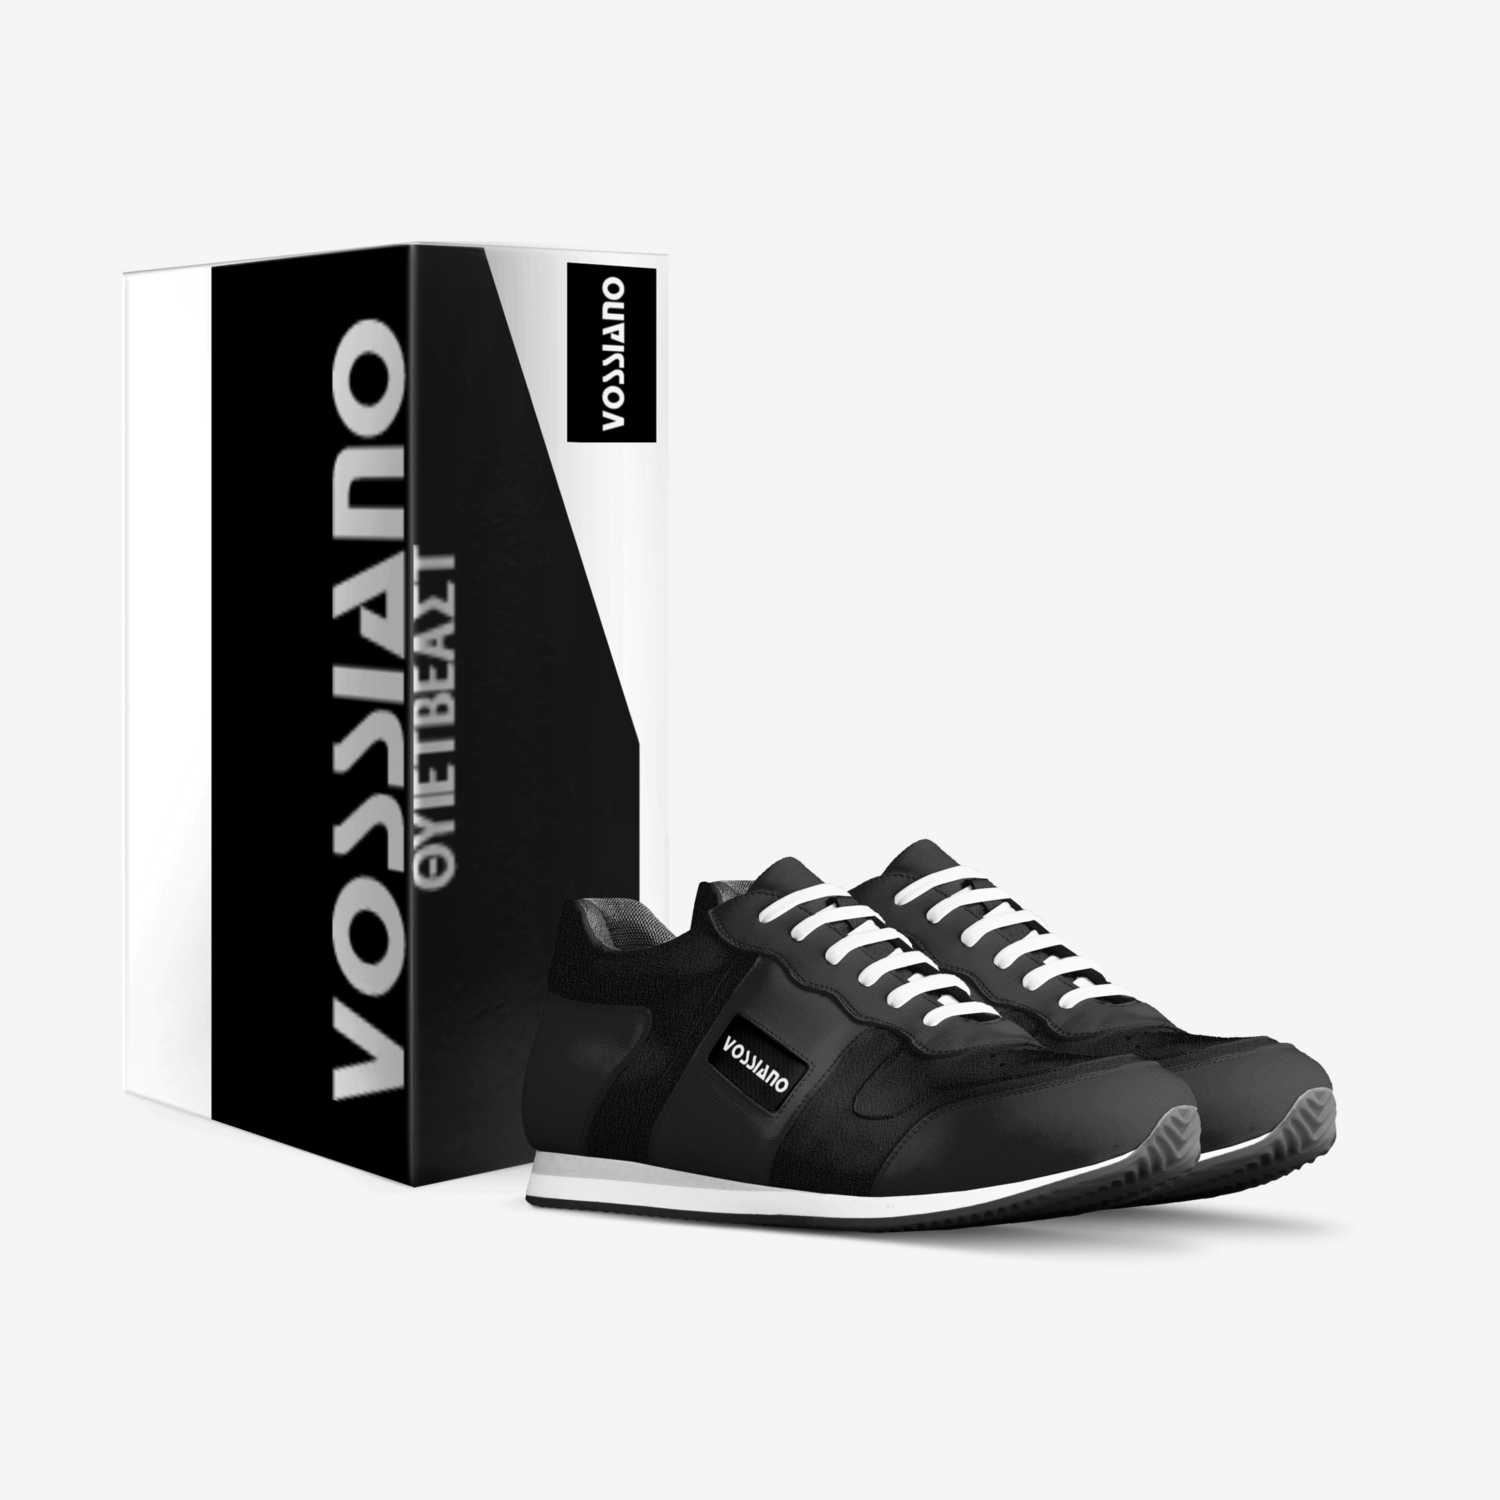 Vossiano custom made in Italy shoes by Voris S Johnson | Box view